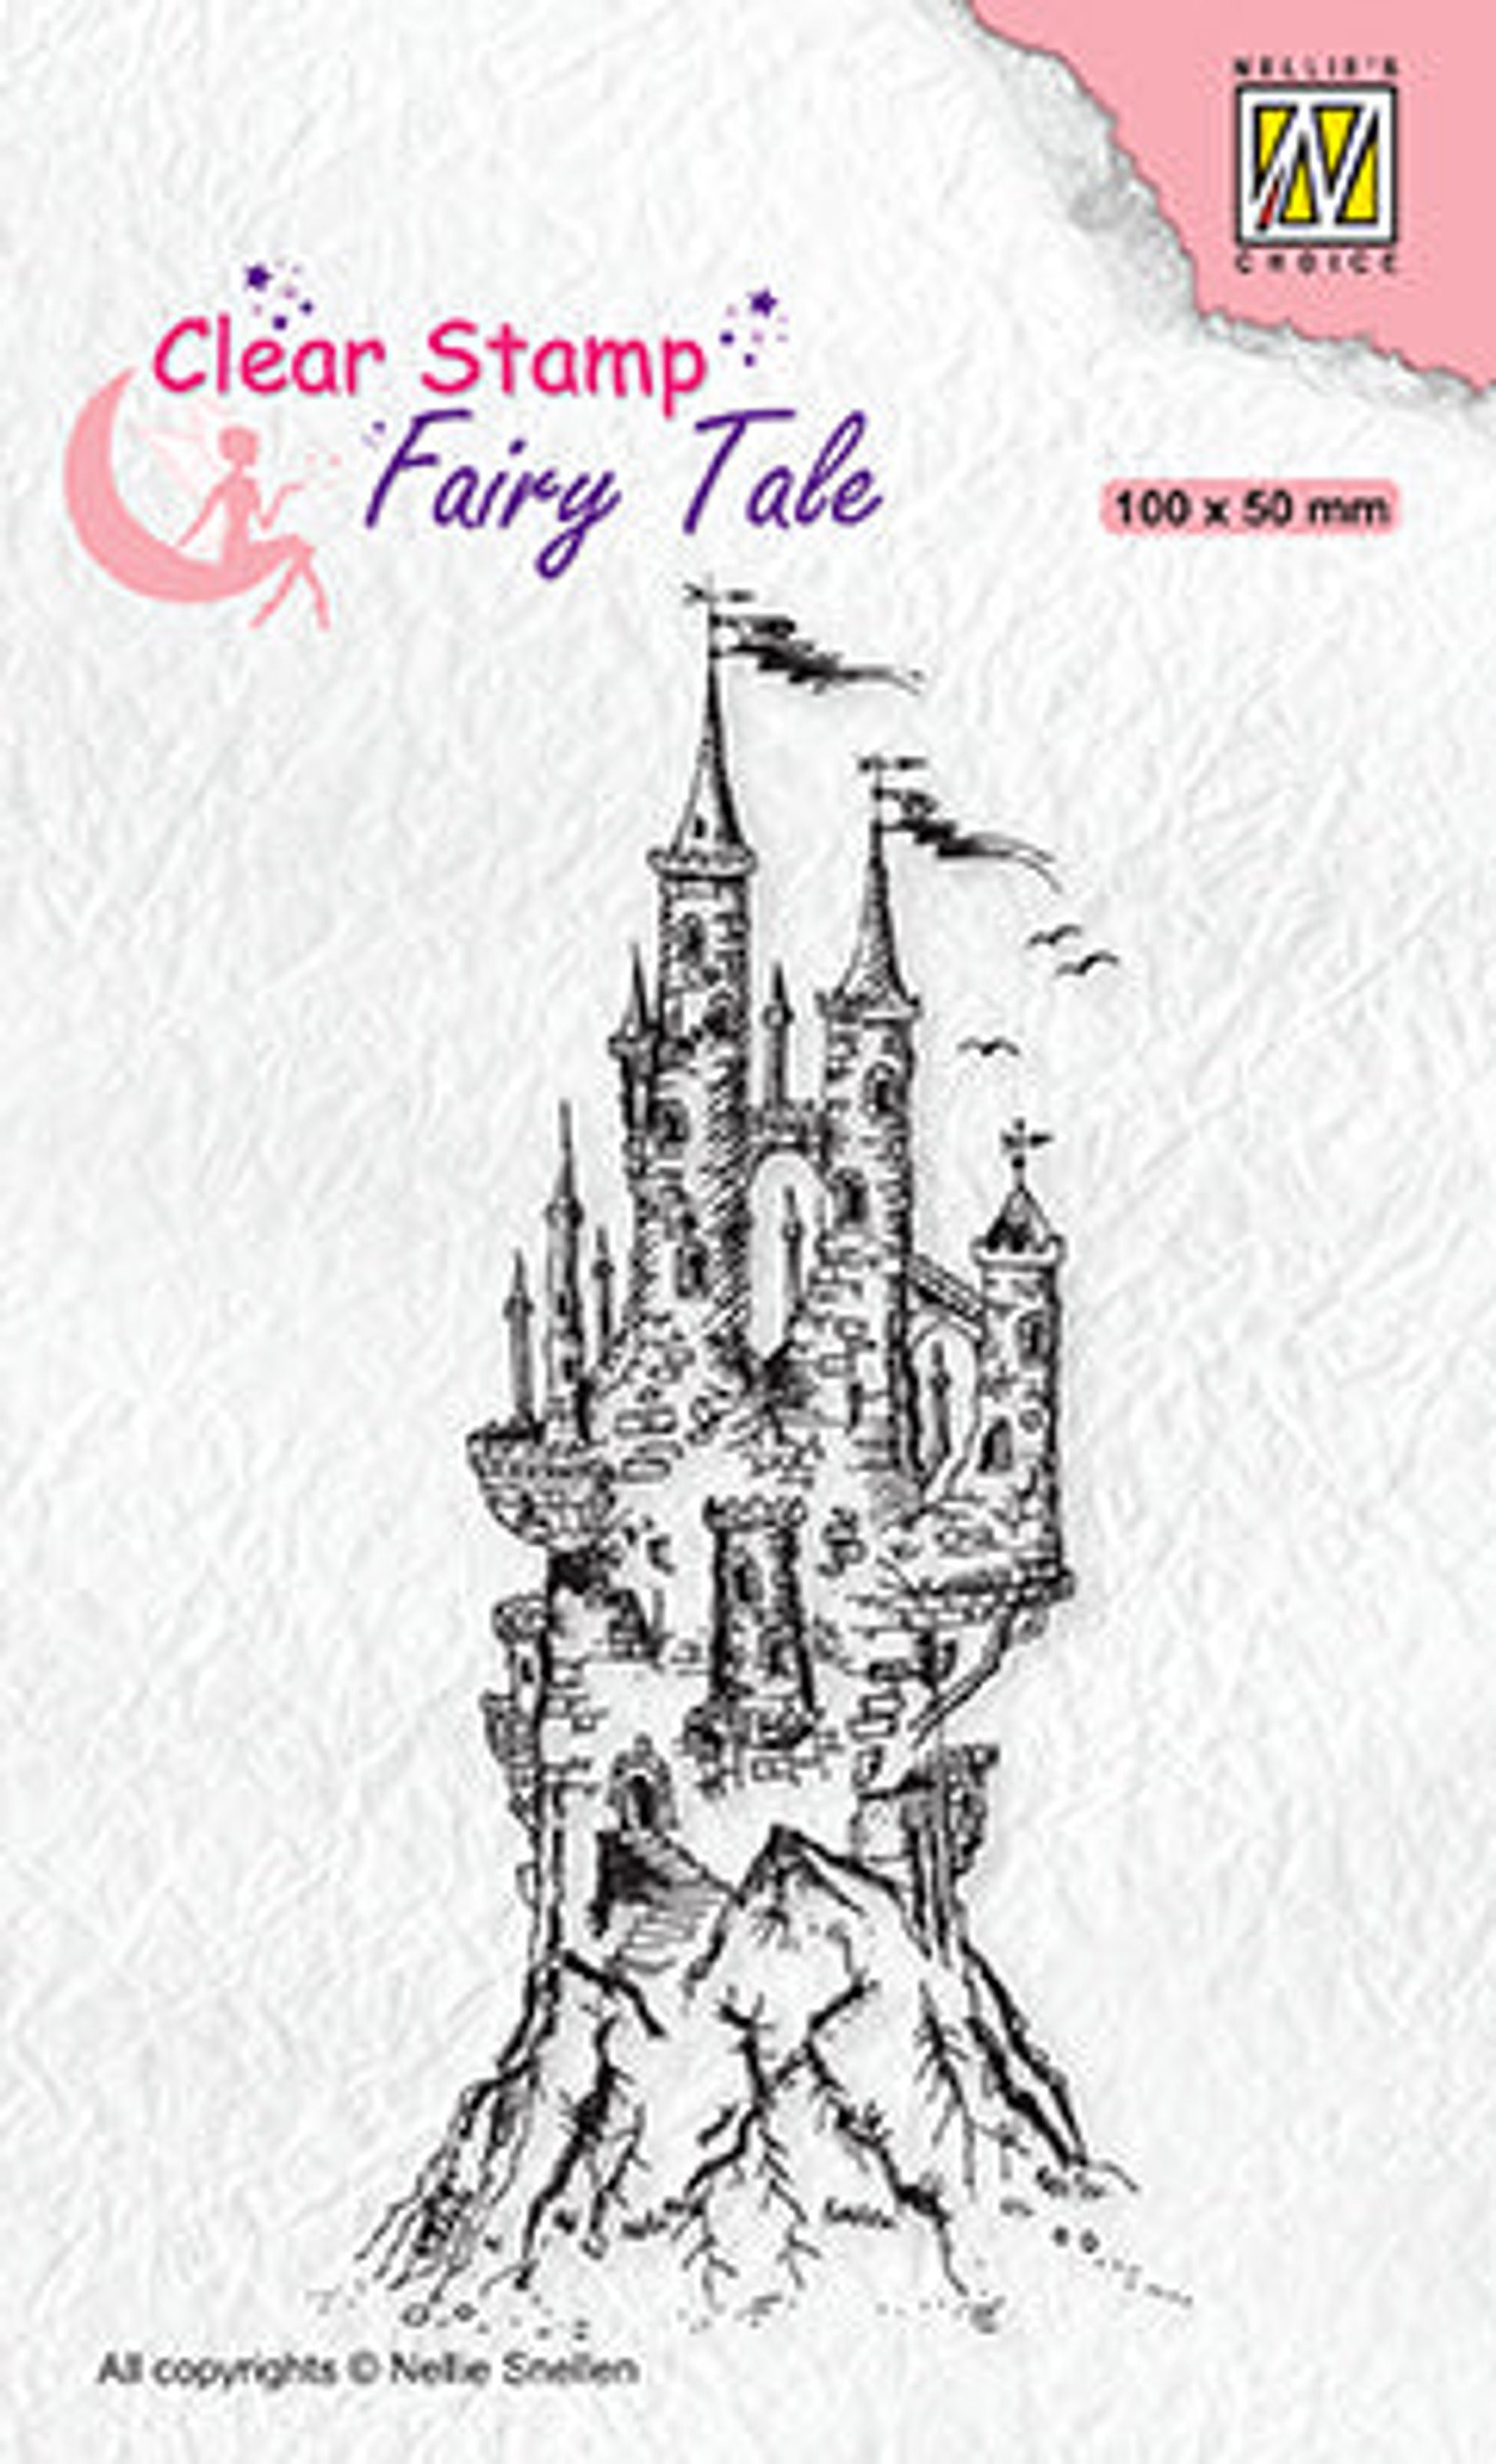 Clear Stamp Fairy Tale - 15 Elves Castle